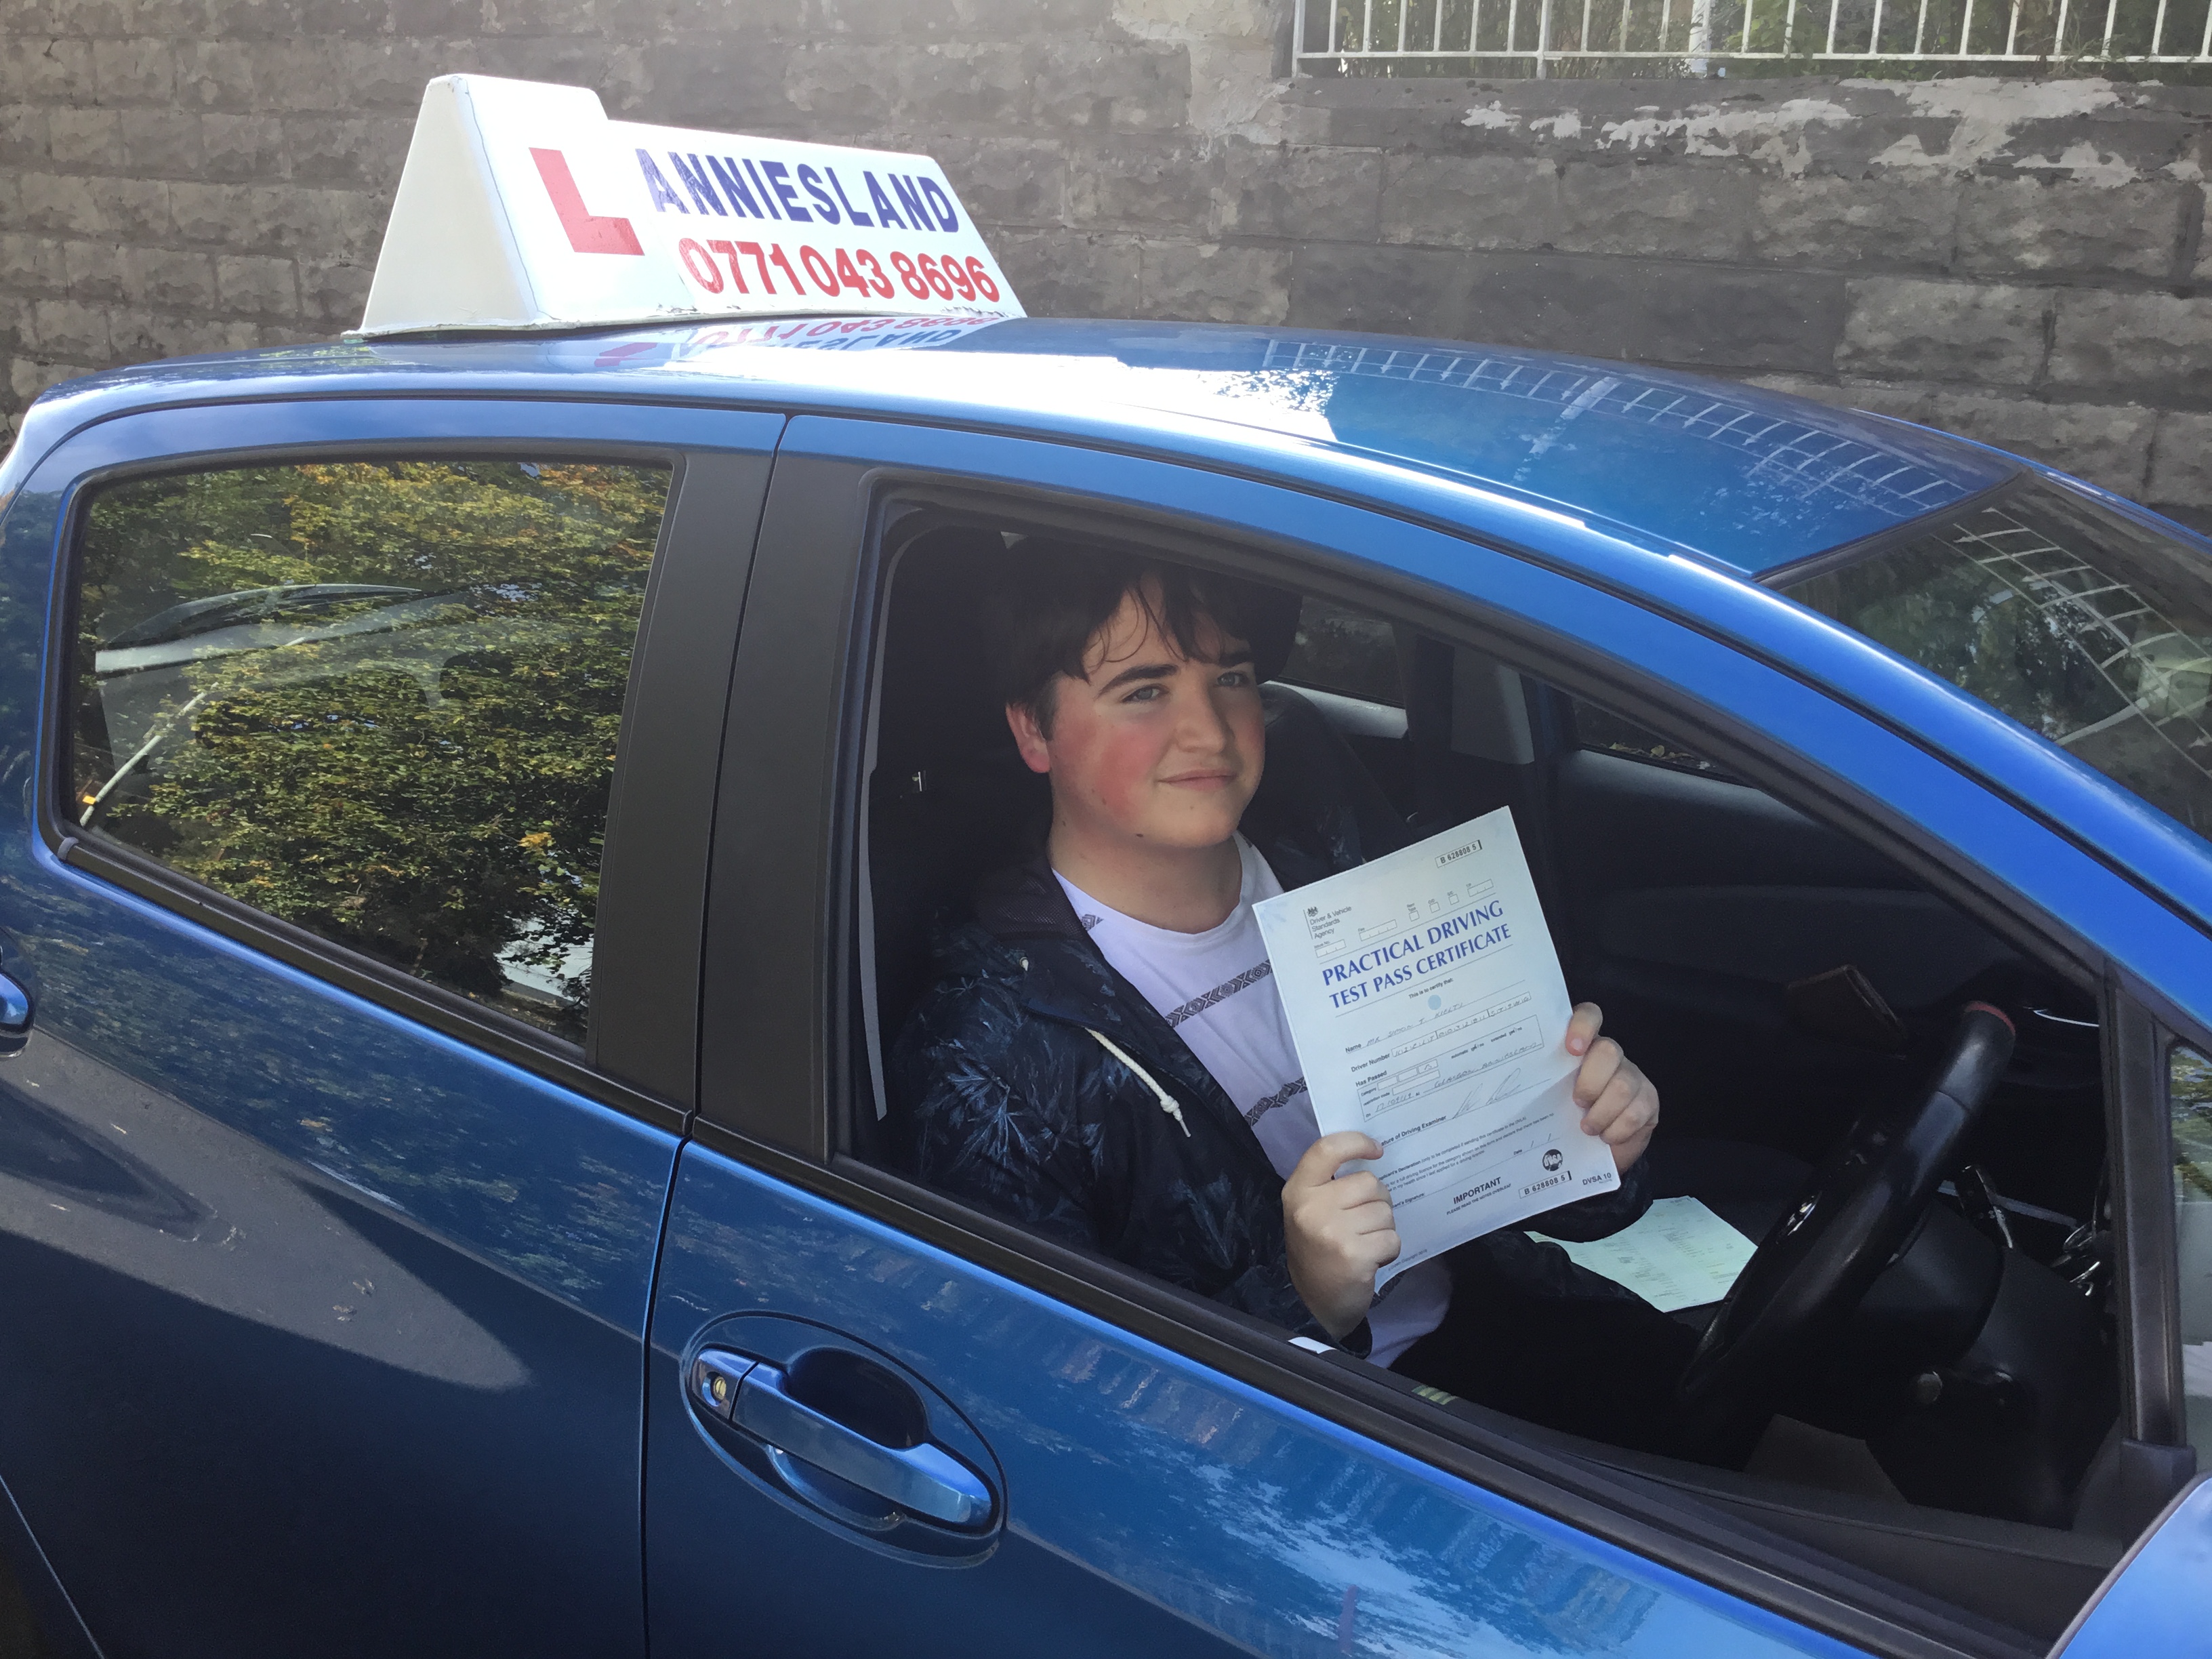 Simon Kielty successfully passed their driving test with Anniesland Driving School